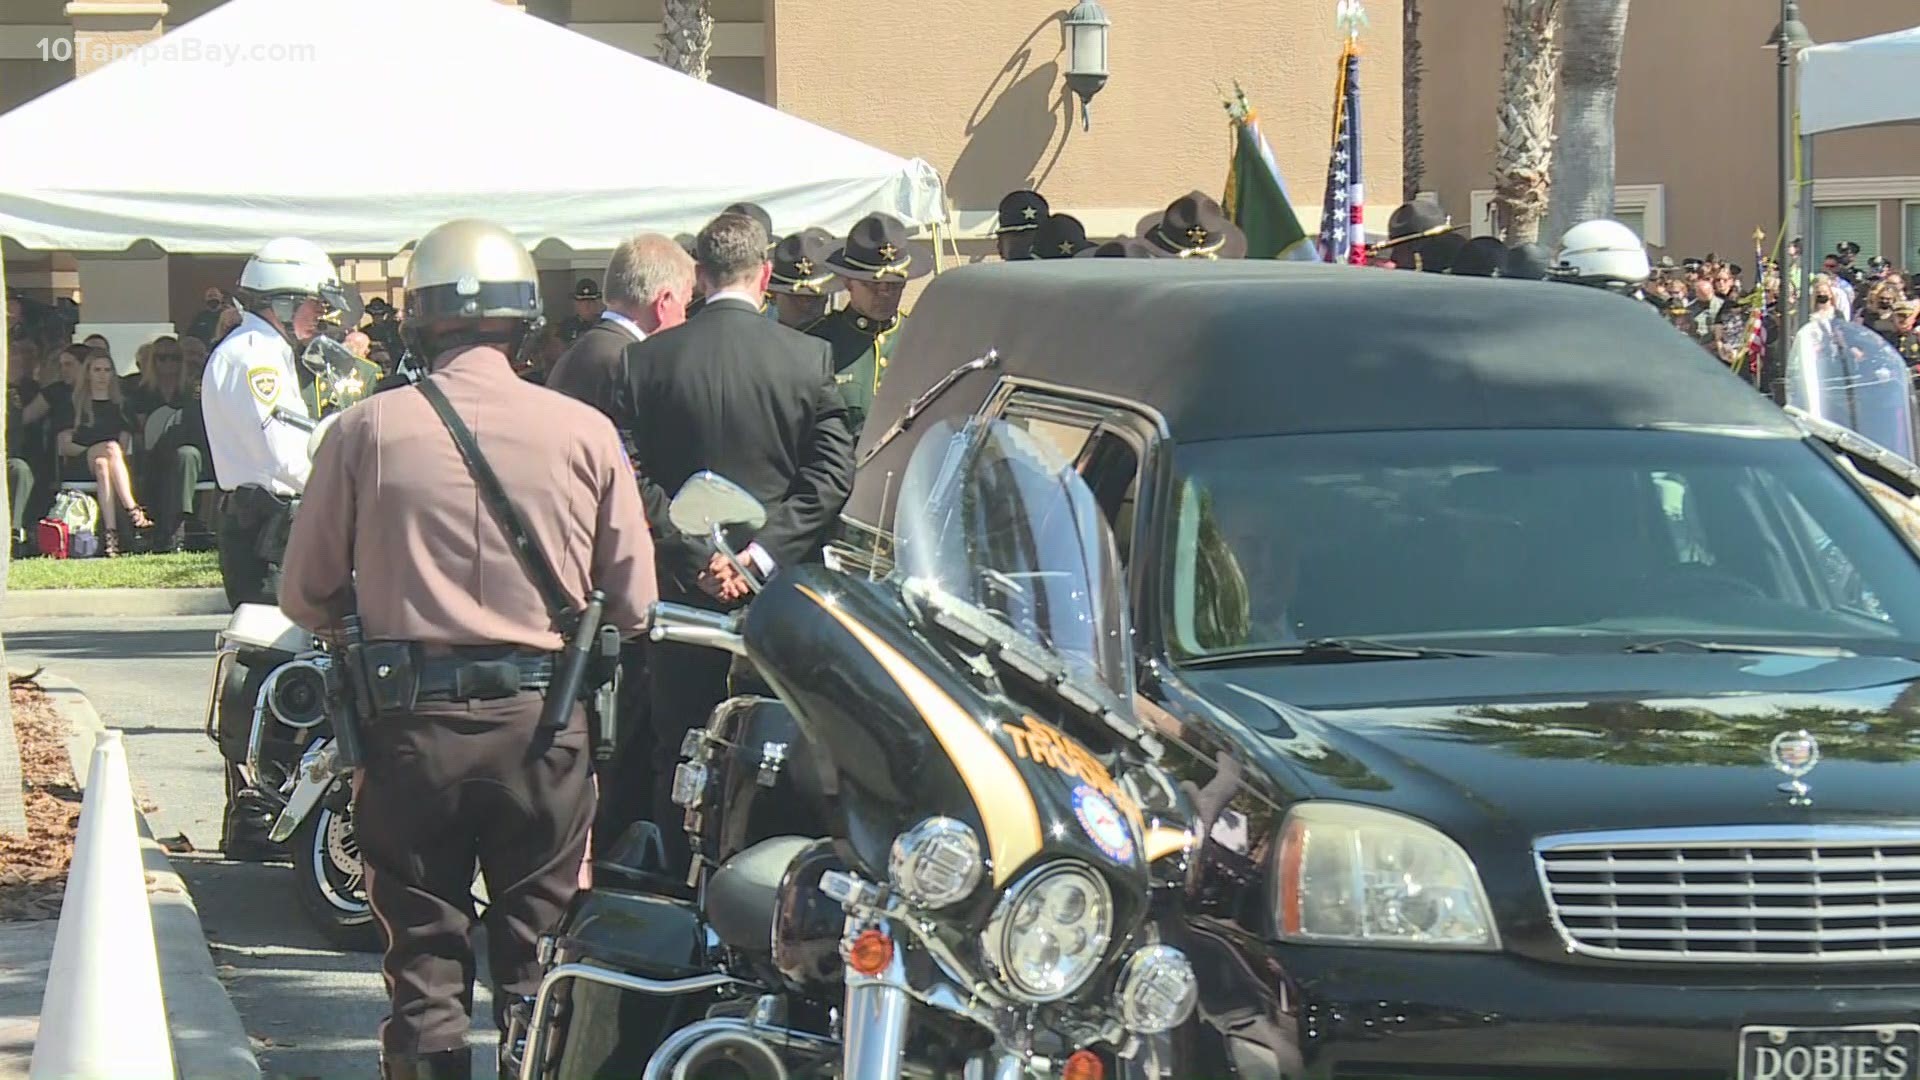 Following the service, law enforcement officers held a final honors ceremony for Deputy Magli including a 21-gun salute, a "missing man" flyover, and a last call.